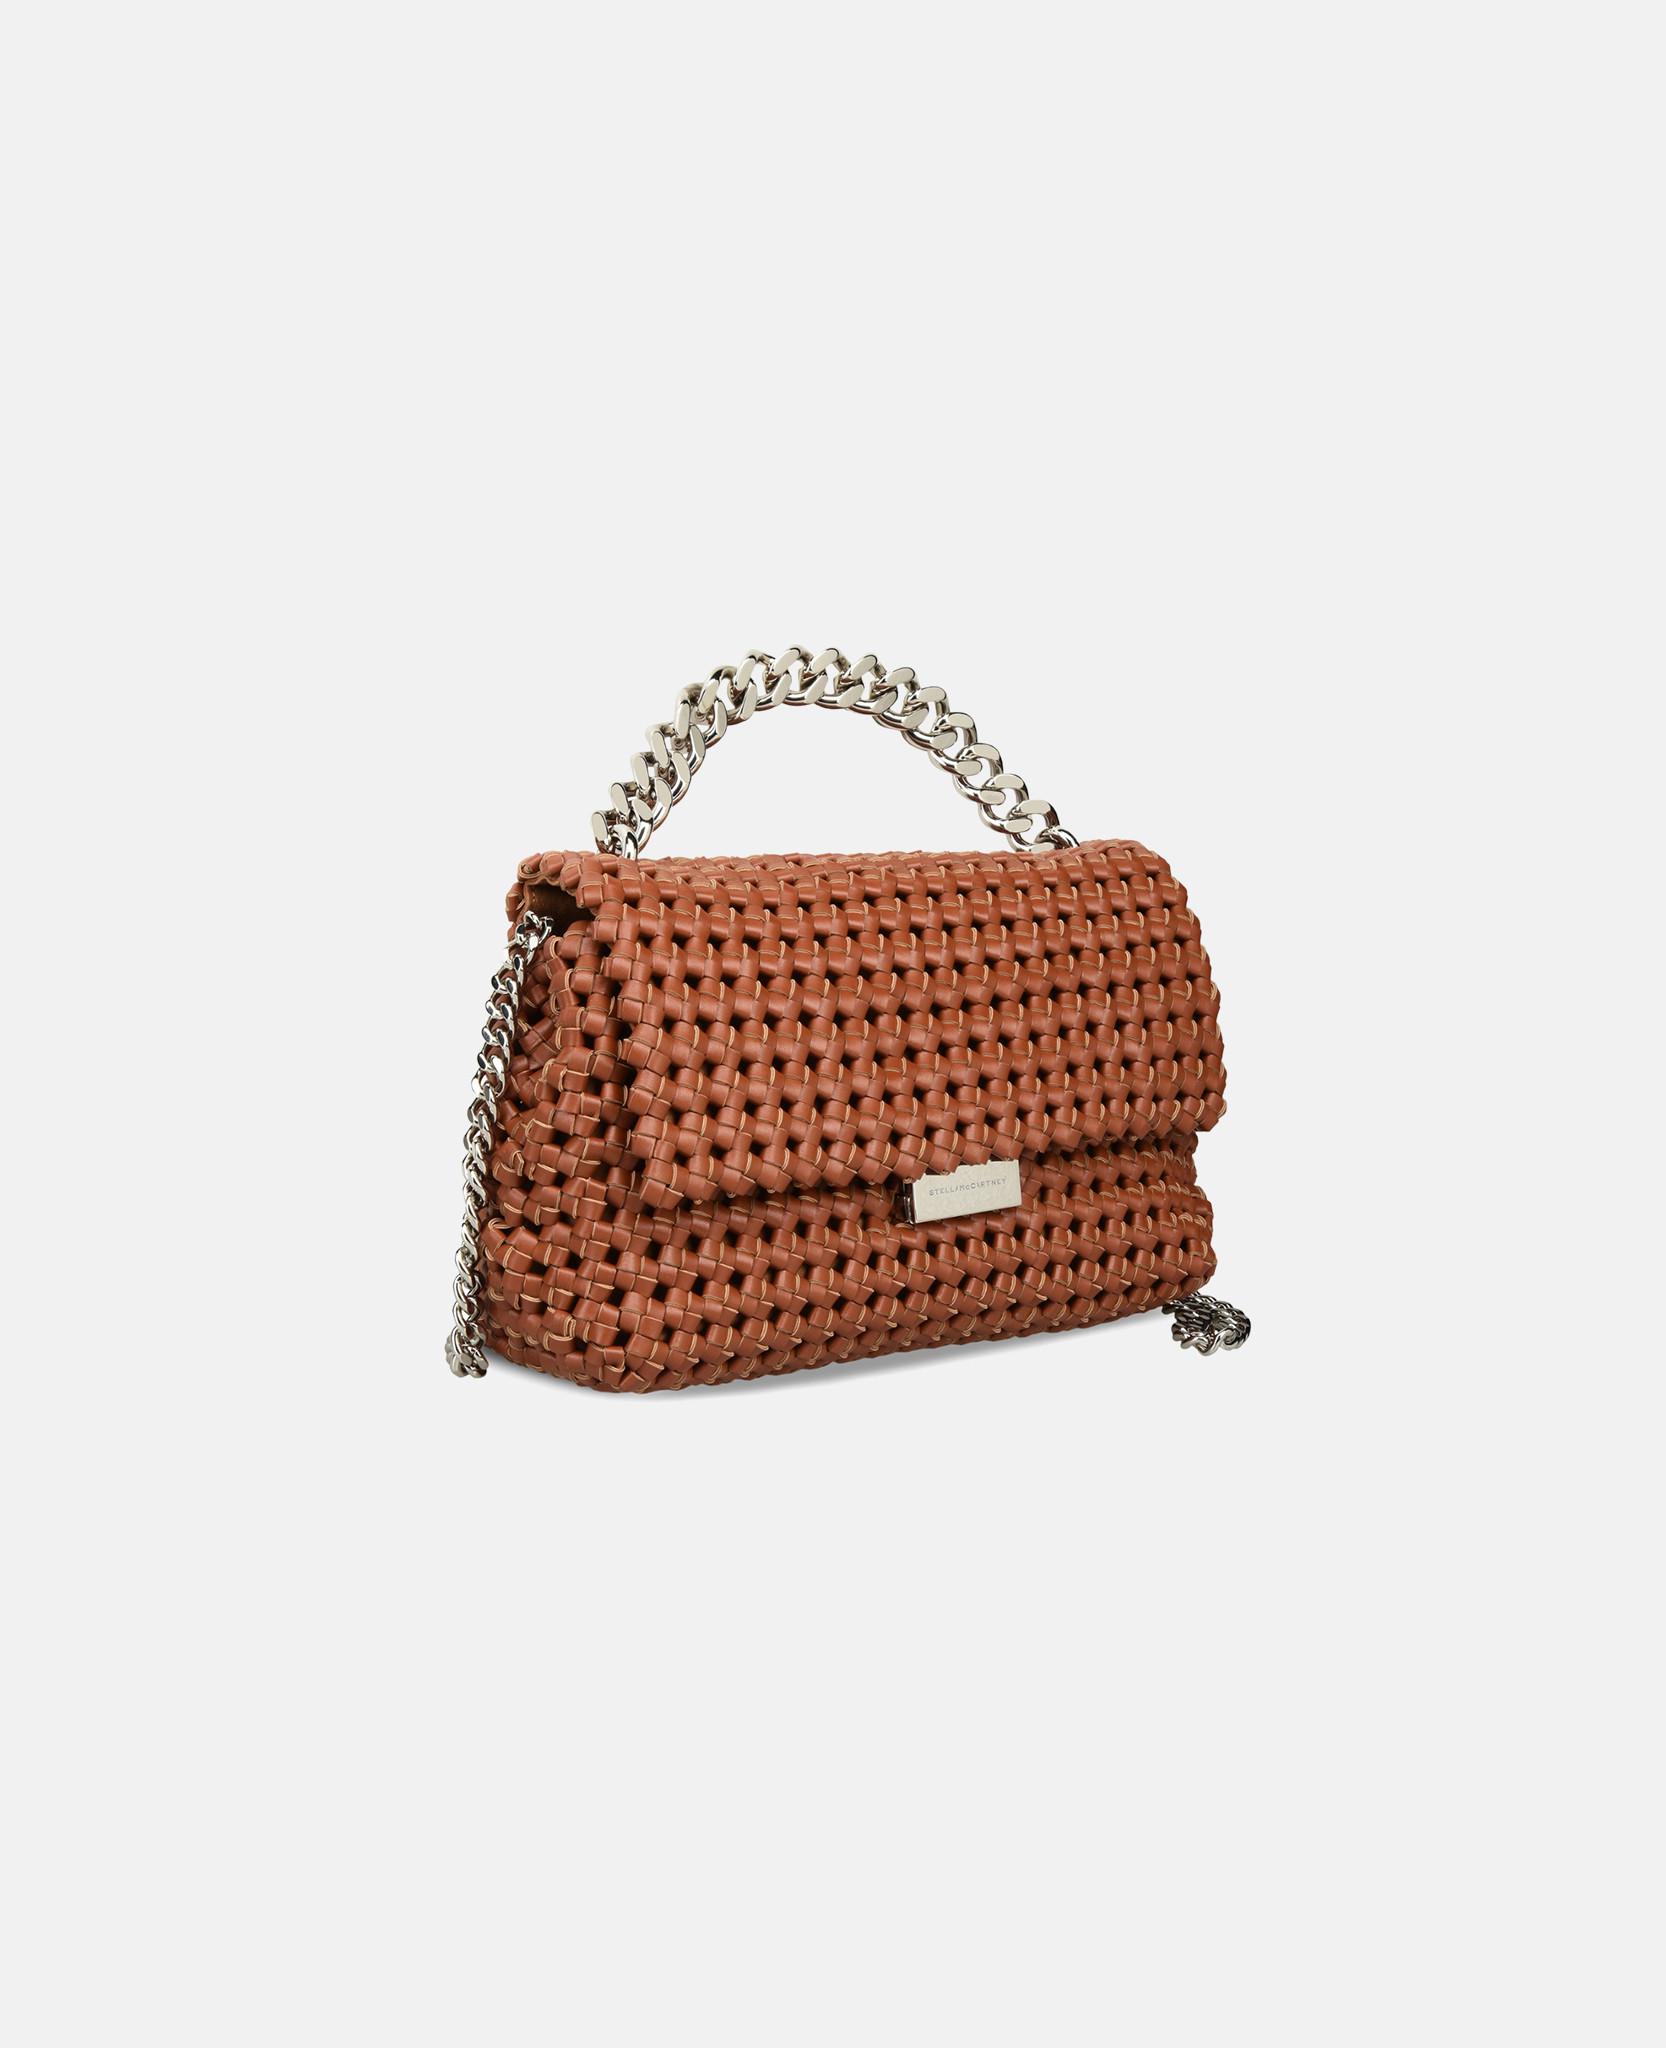 Lyst - Stella McCartney Brandy Becks Small Woven Faux-Leather Shoulder Bag in Brown